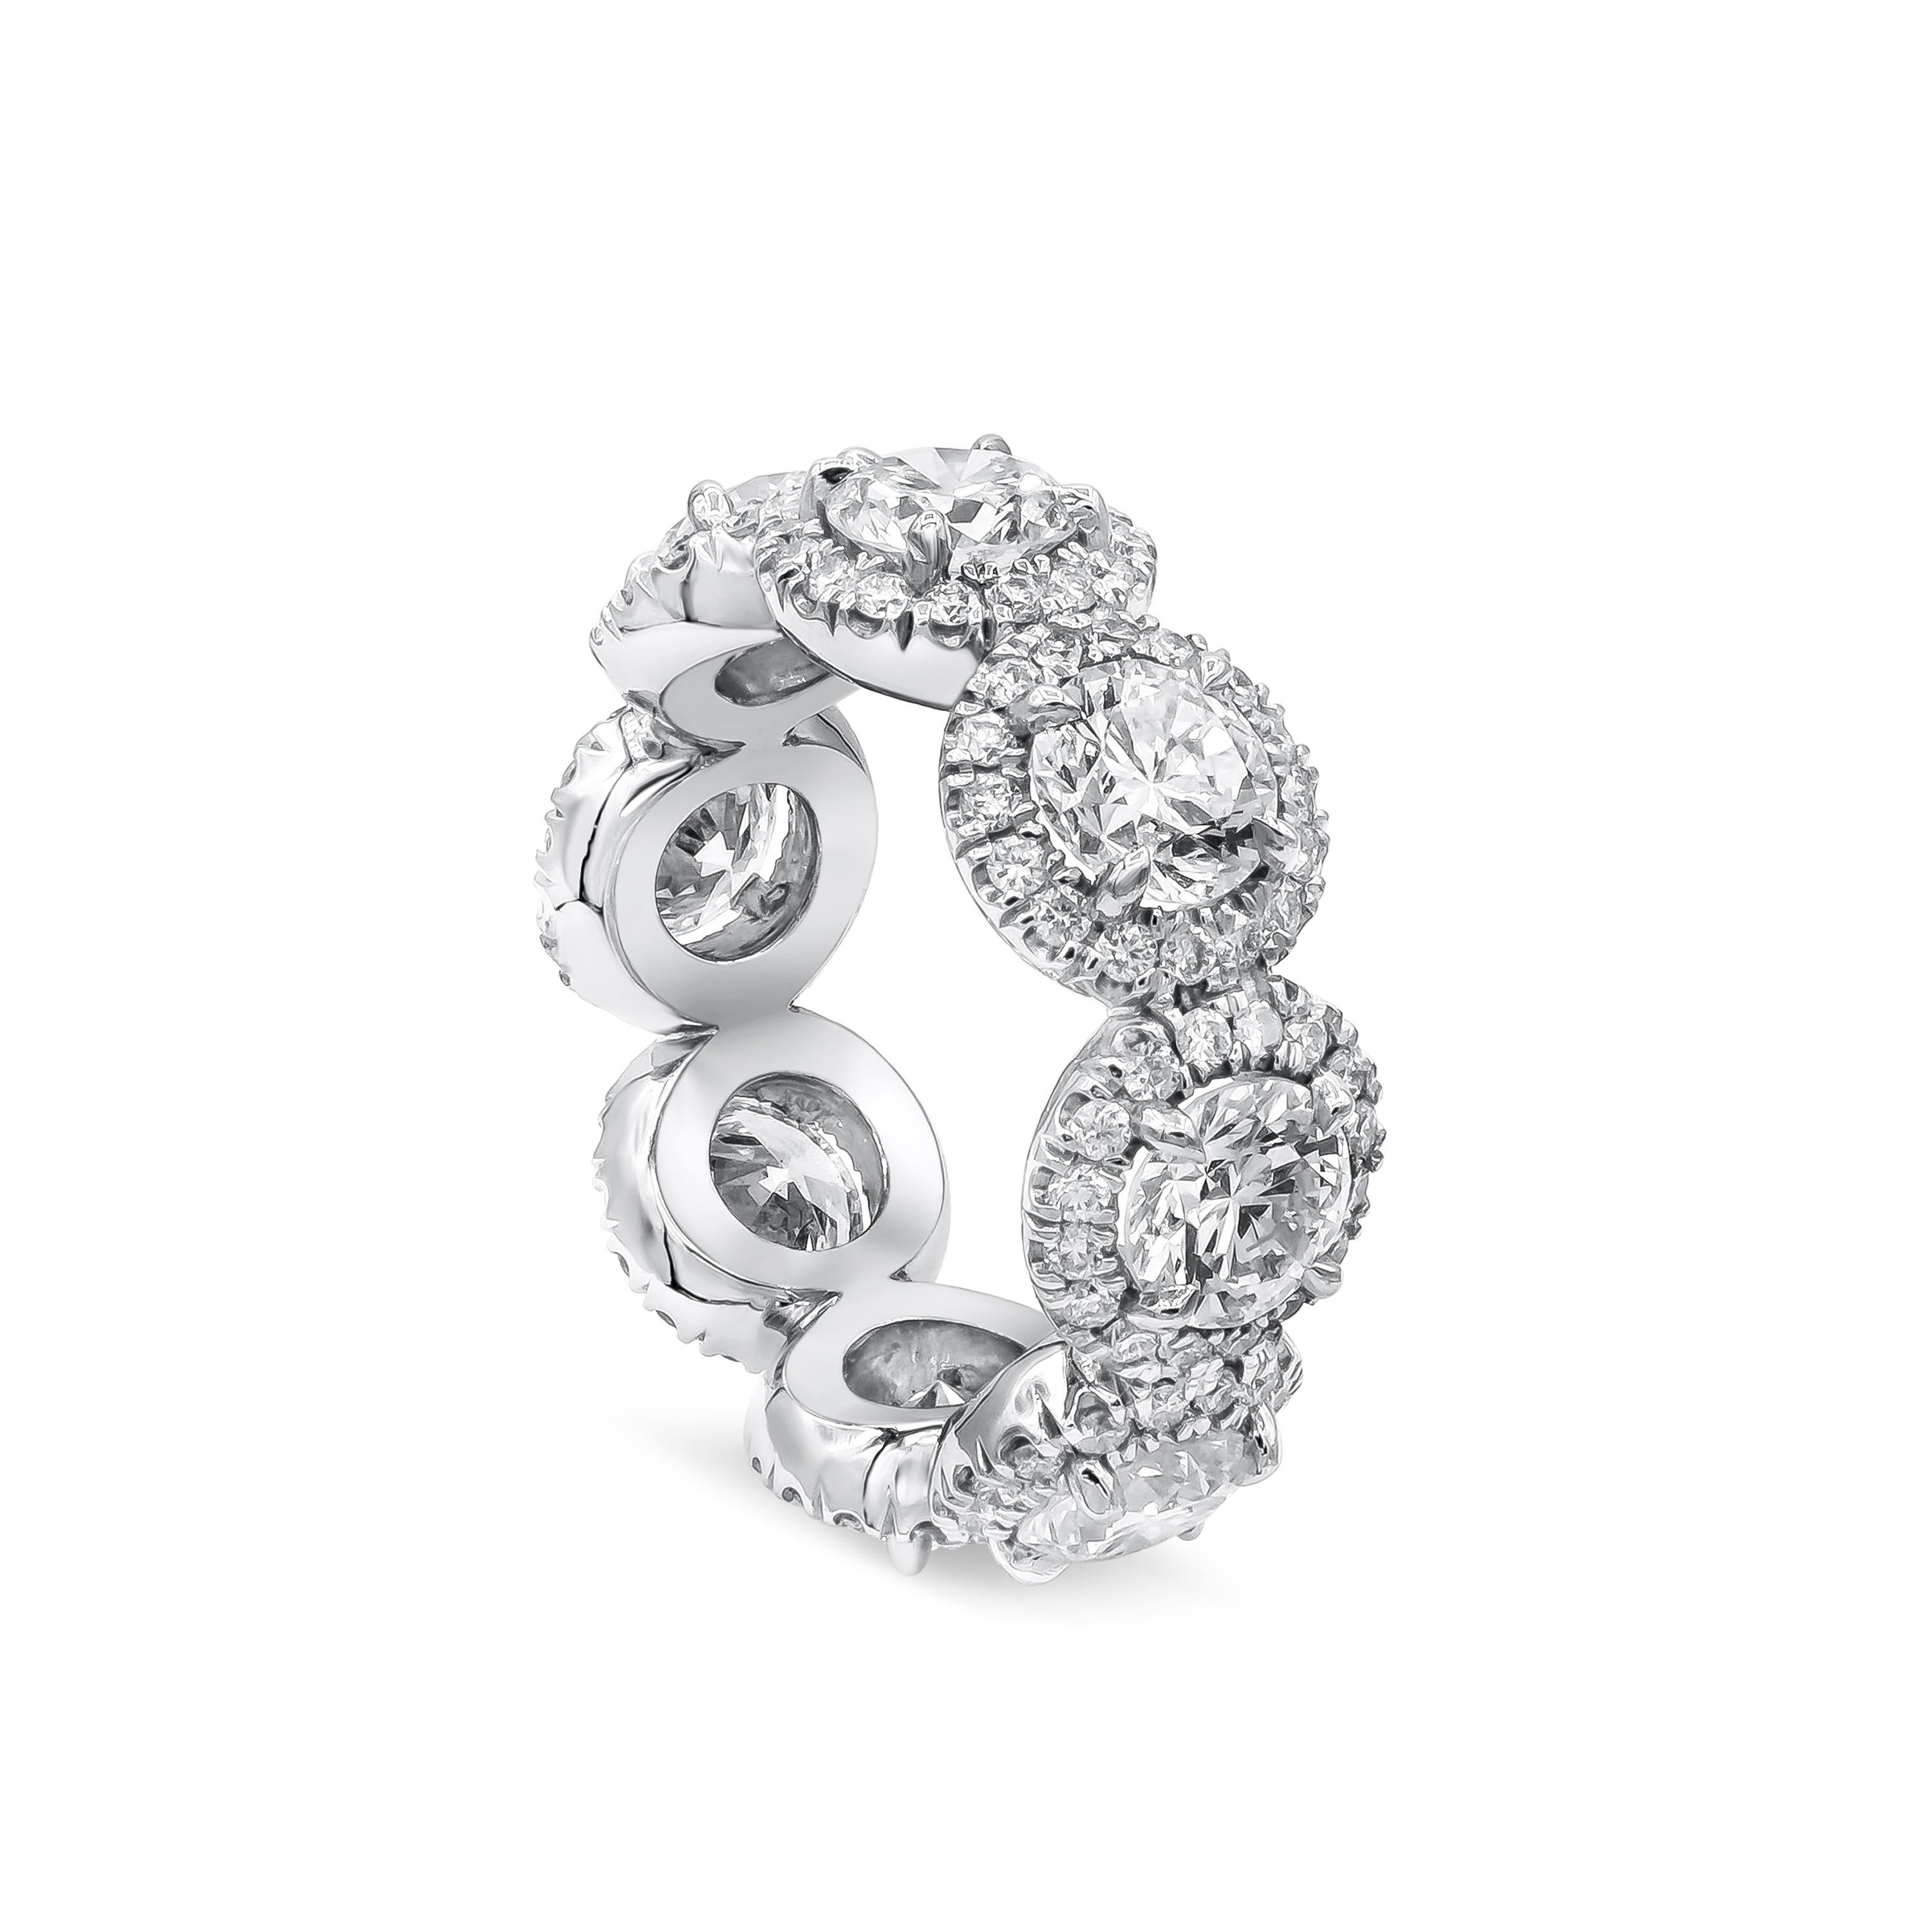 Elegantly crafted eternity wedding band ring, showcasing eight round brilliant diamonds of 4.62 carats total. Accented by round diamonds of 1.05 carat total. Set in platinum.

Roman Malakov is a custom house, specializing in creating anything you